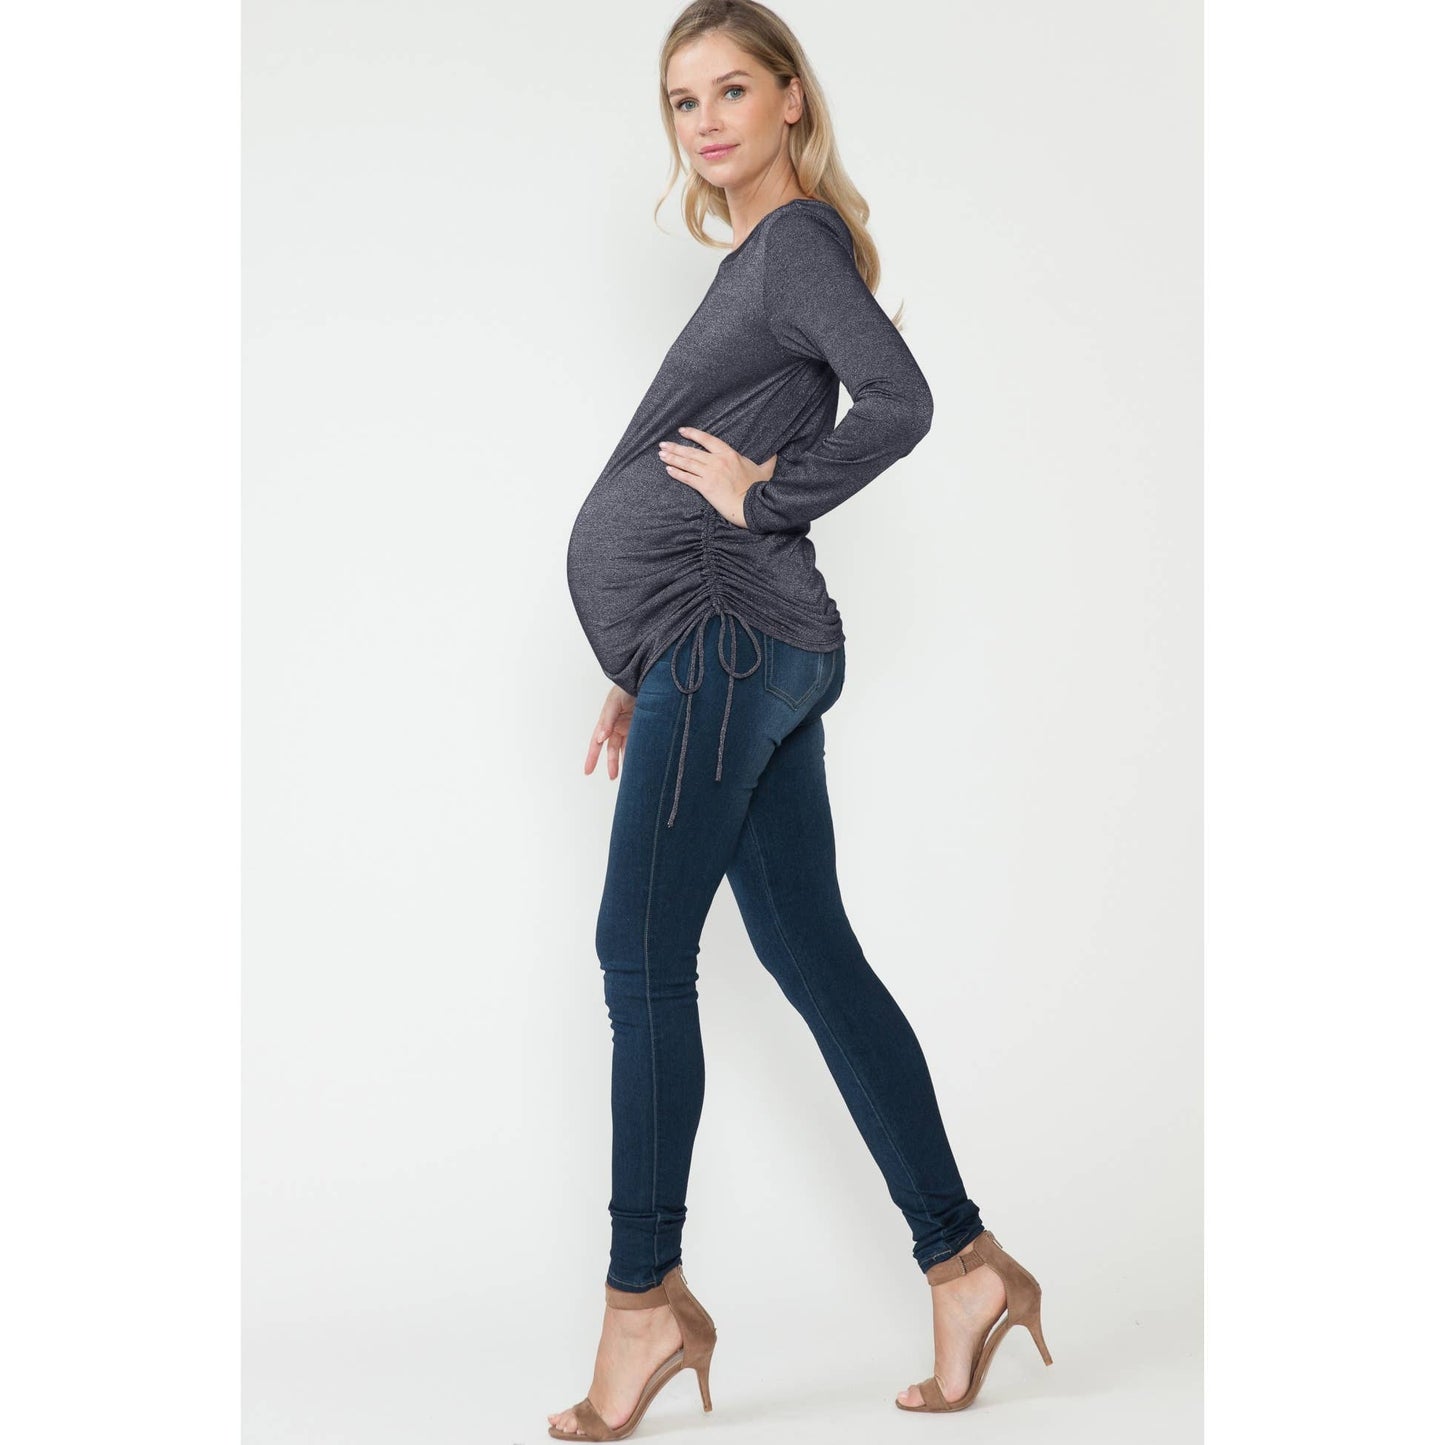 Maternity Holiday Sparkly Basic Top